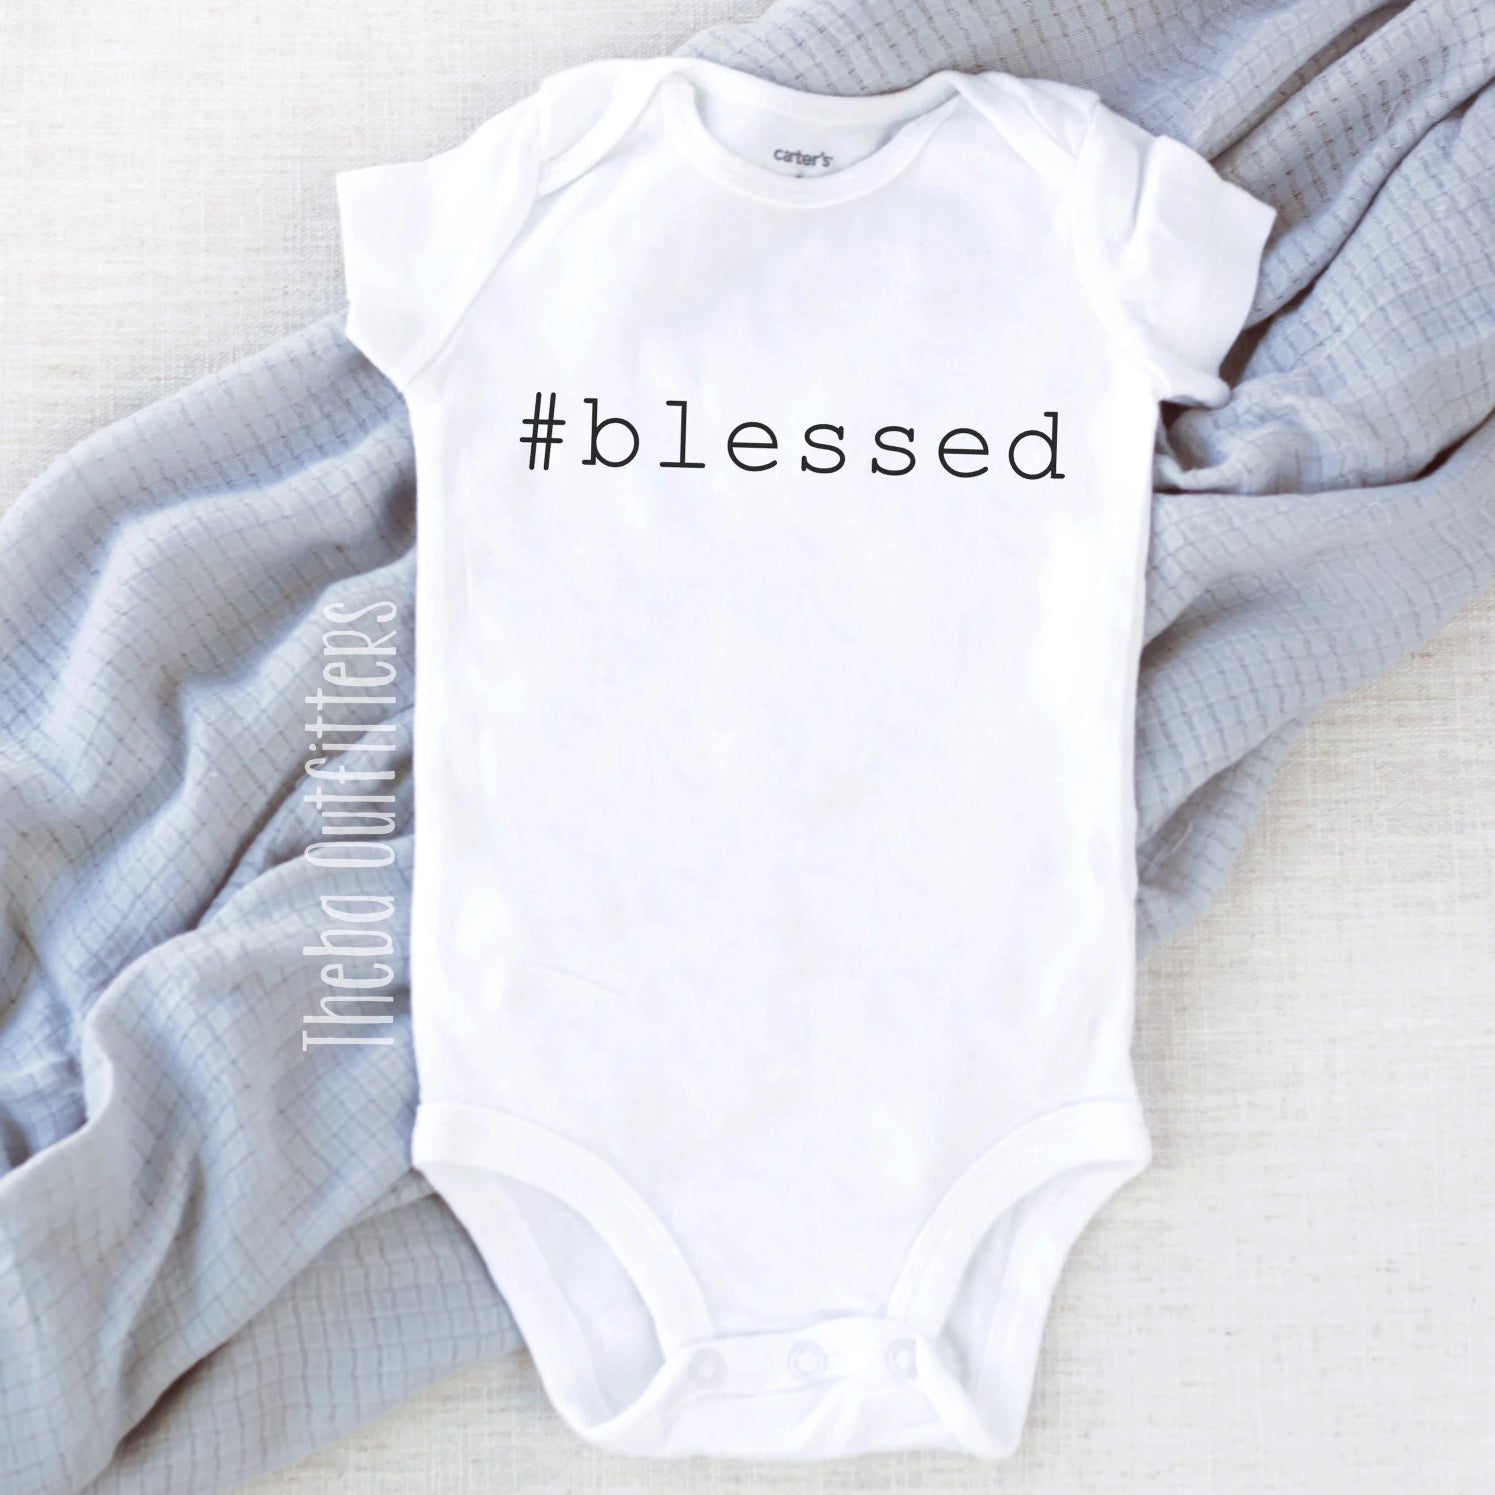 #Blessed Hashtag Blessed Thanksgiving Custom Baby Onesie Bodysuit Newborn Infant Theba Outfitters